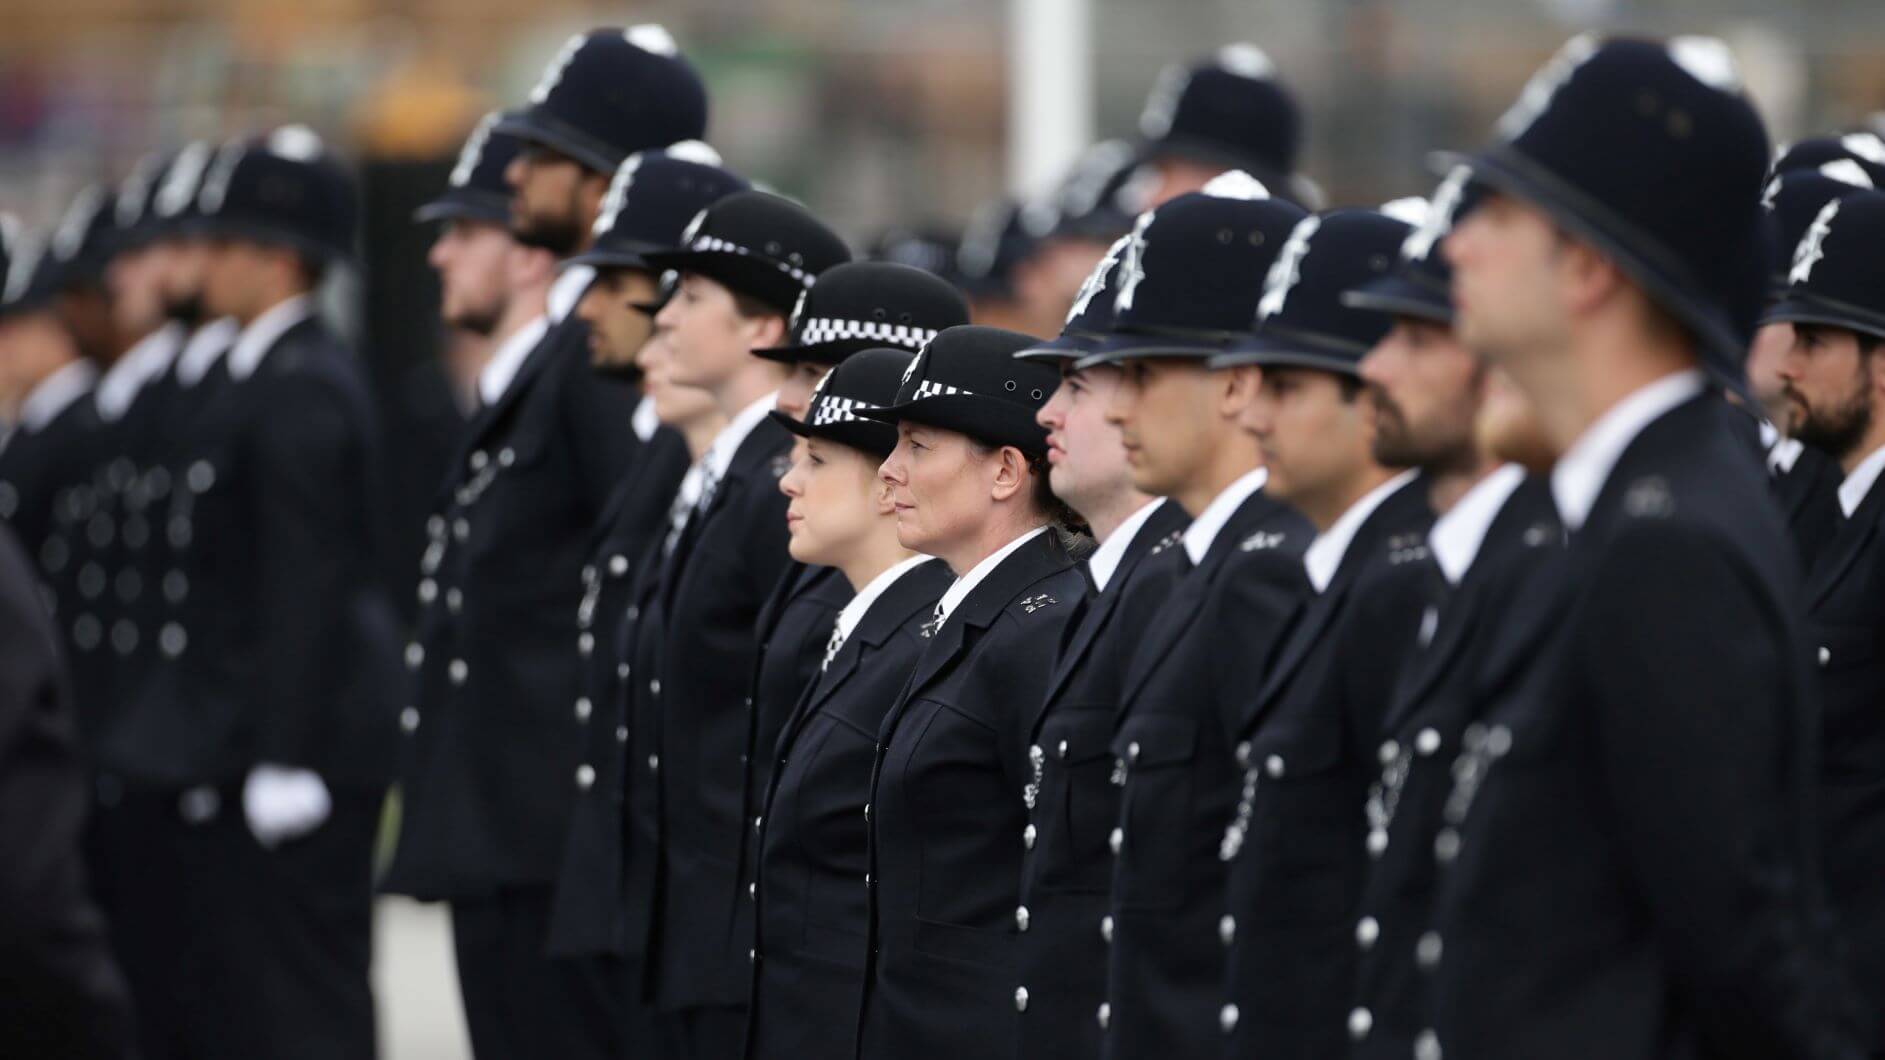 Ministers Announce Police Recruitment Targets For Forces